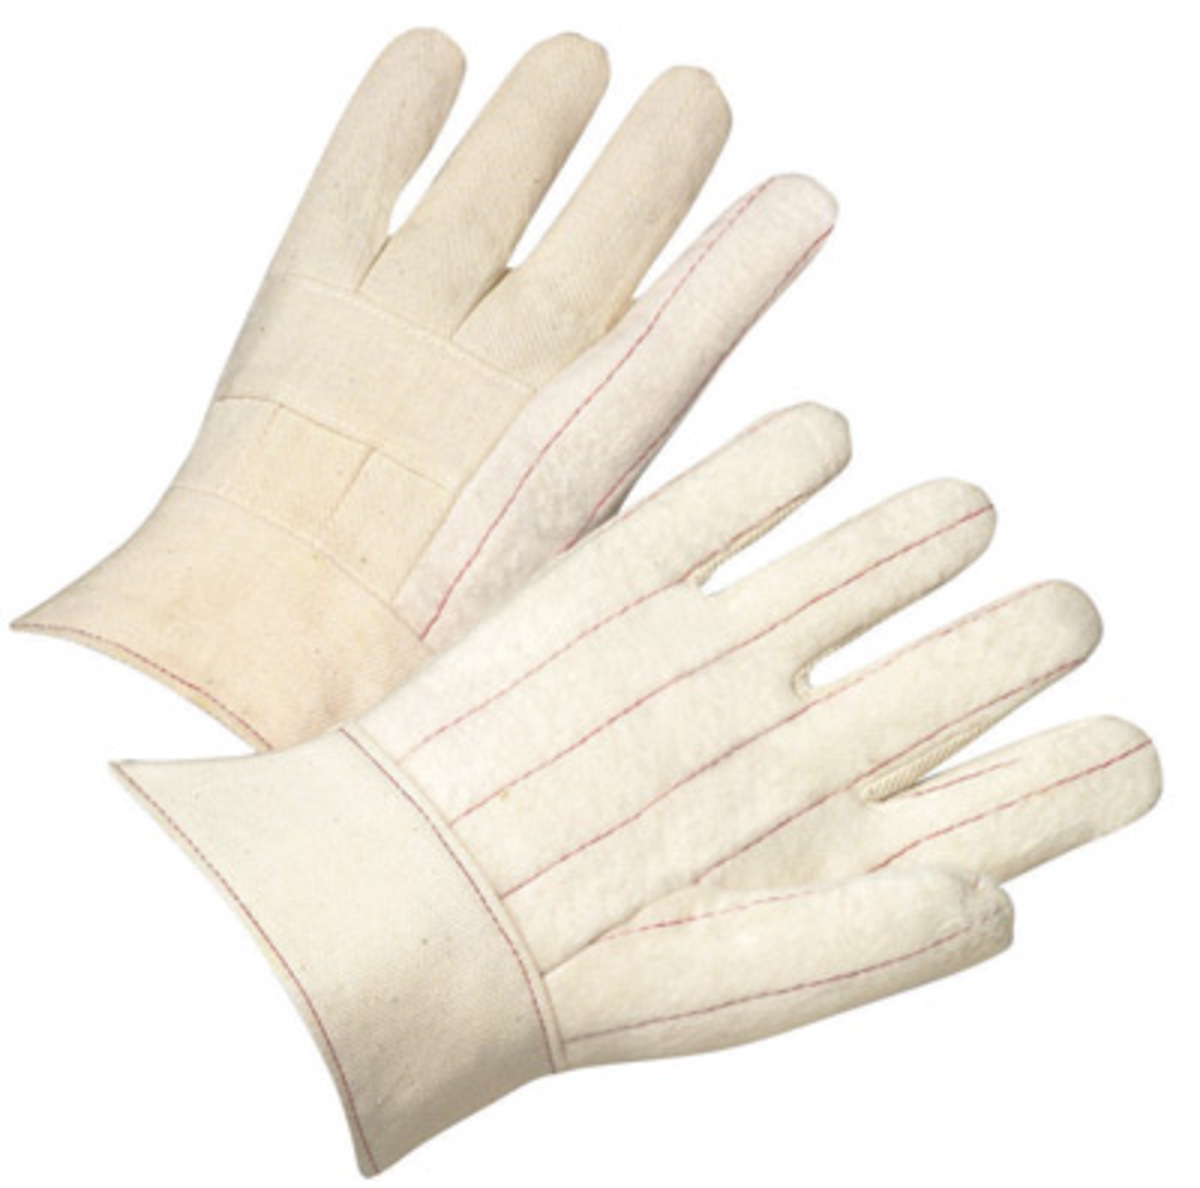 RADNOR® Natural Medium Weight Cotton Hot Mill Gloves With Band Top Cuff